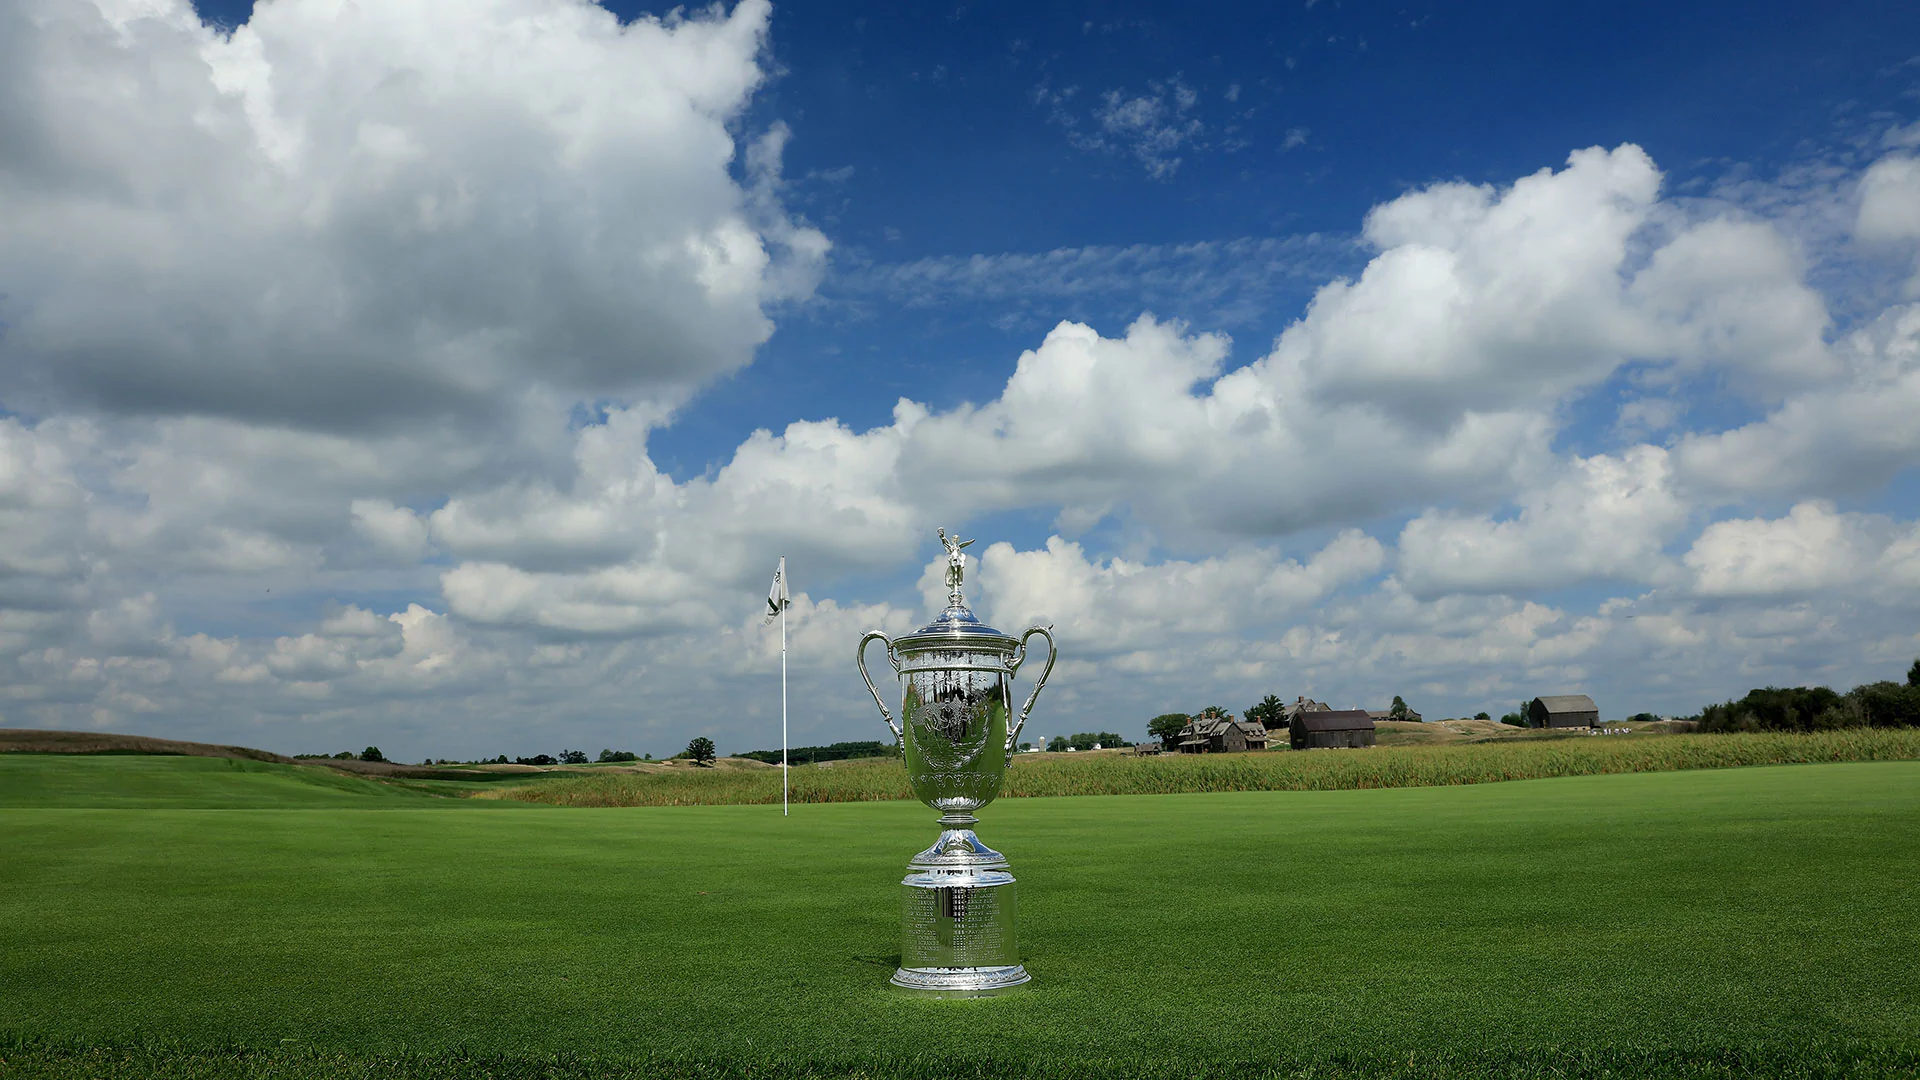 Podcast: Get ready for the 117th U.S. Open 2